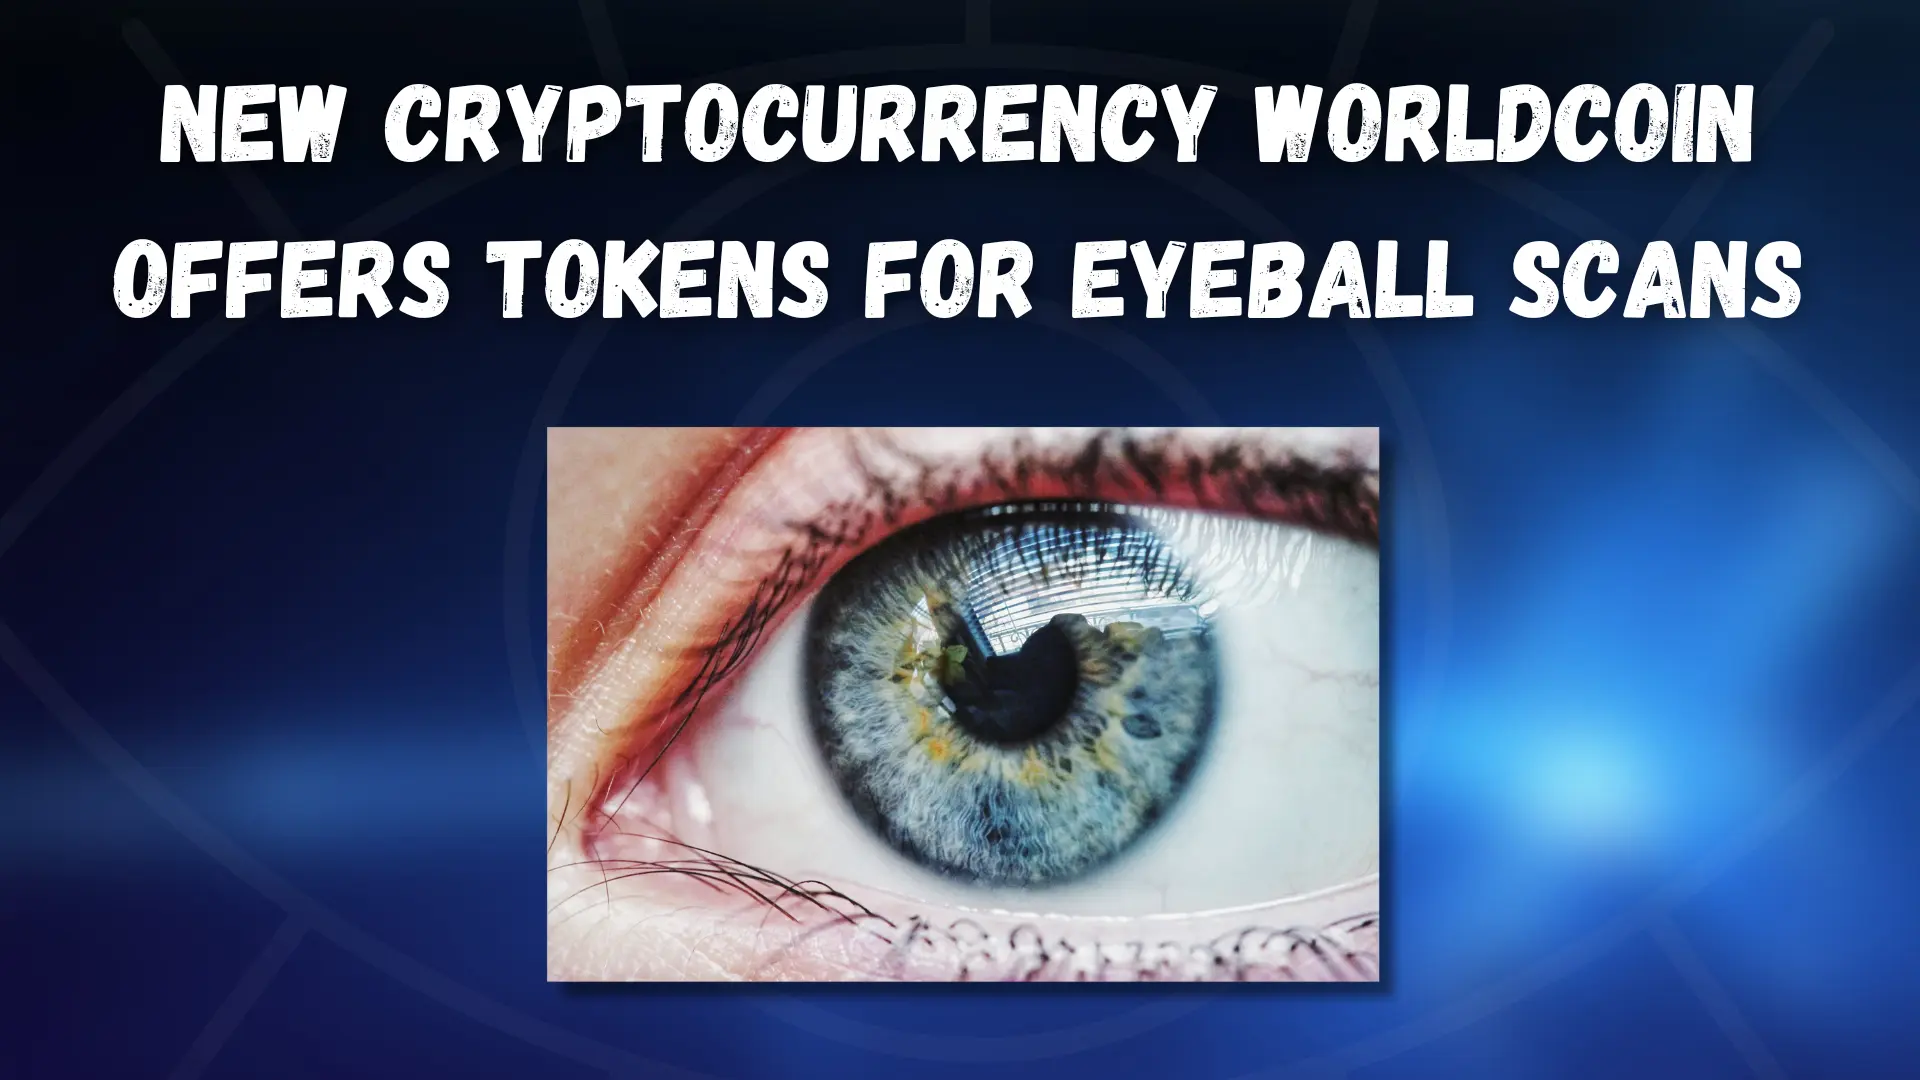 New Cryptocurrency Worldcoin Offers Tokens for Eyeball Scans